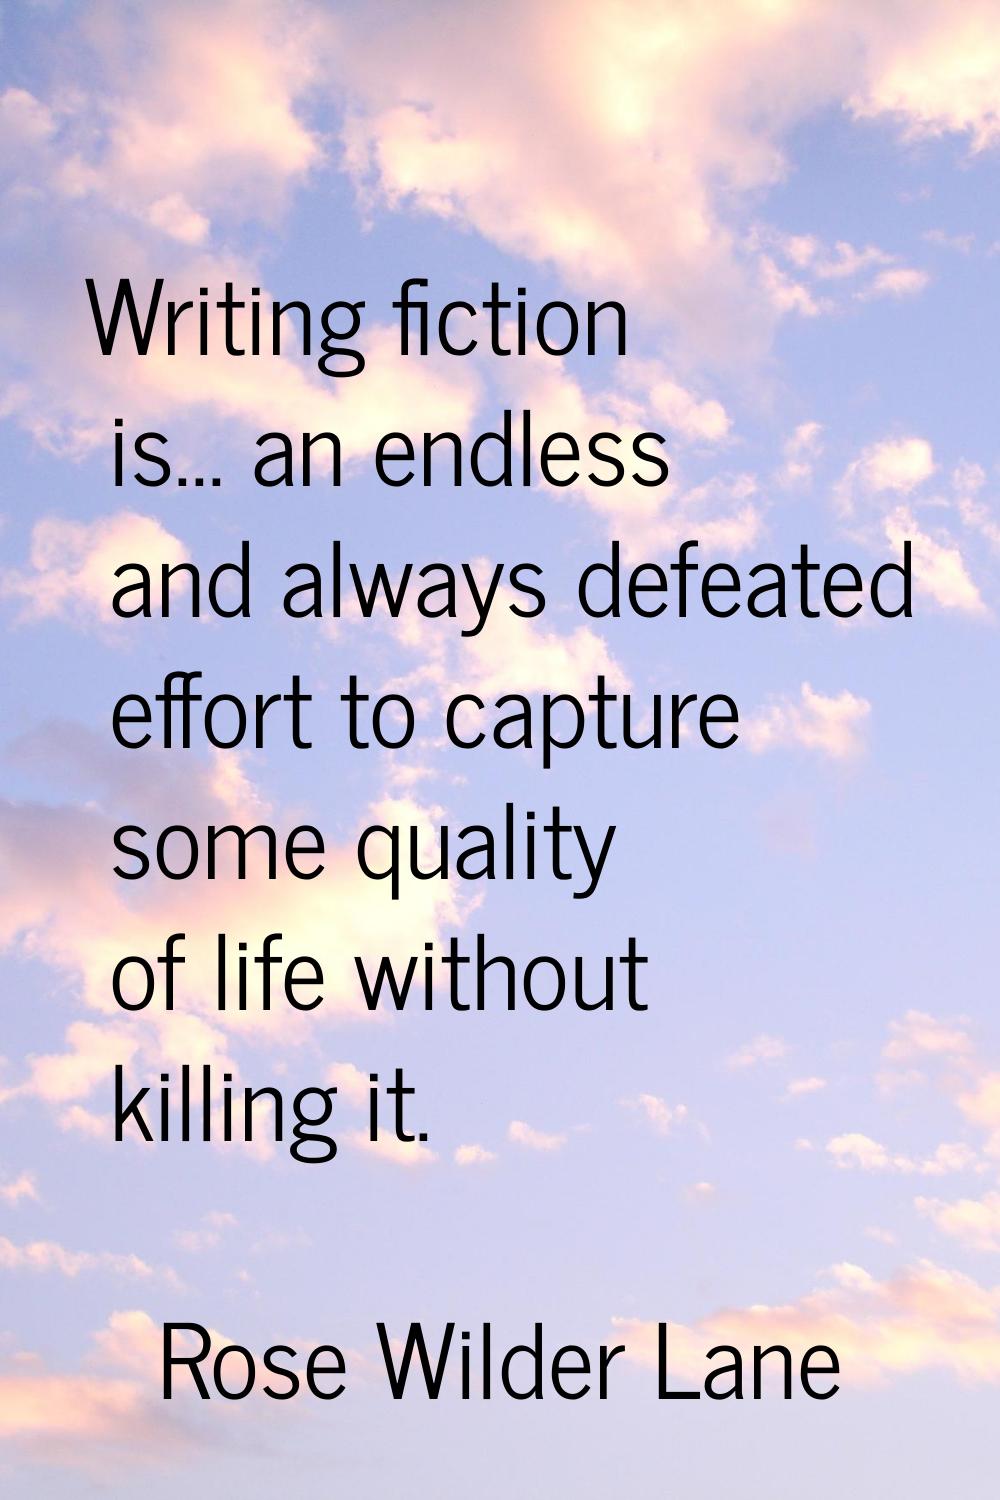 Writing fiction is... an endless and always defeated effort to capture some quality of life without